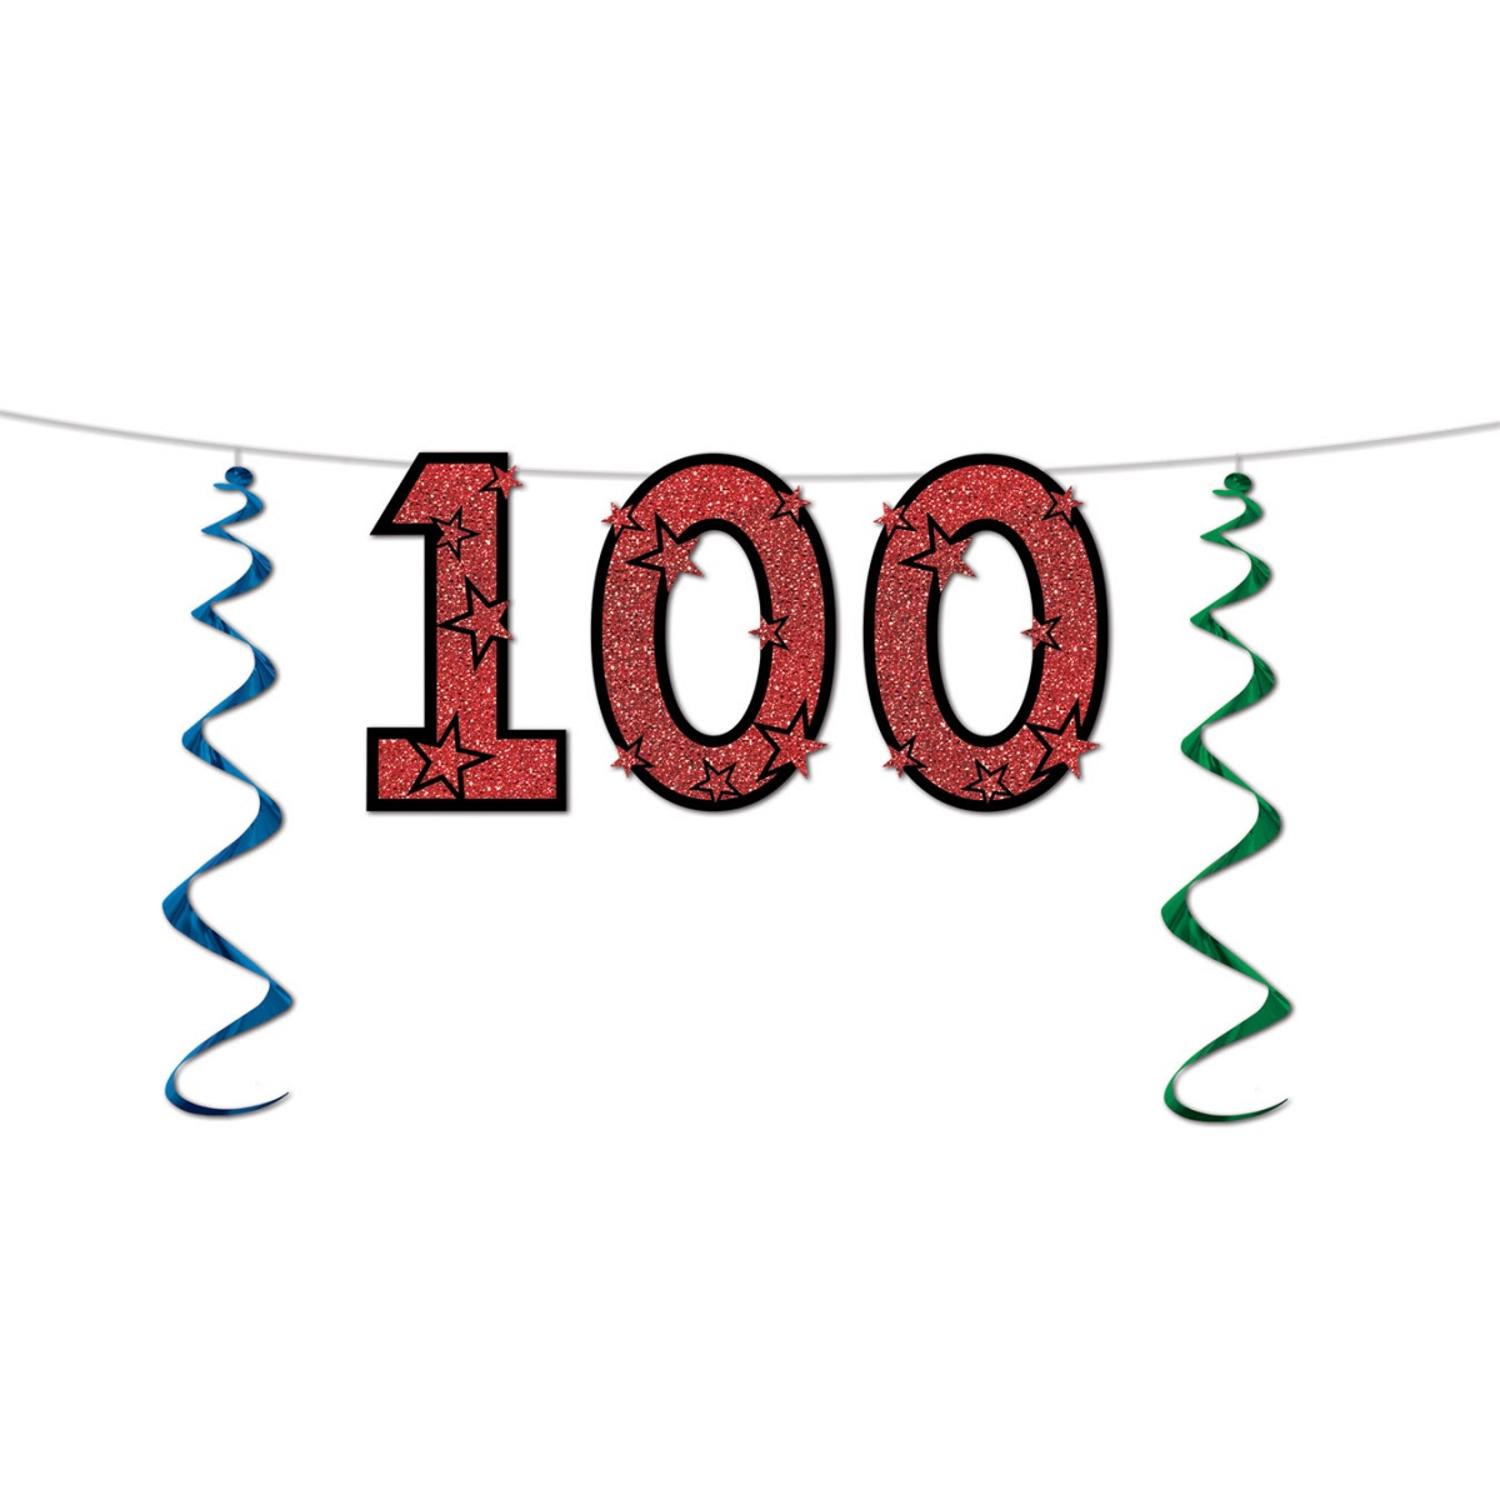 streamers clipart special occasion